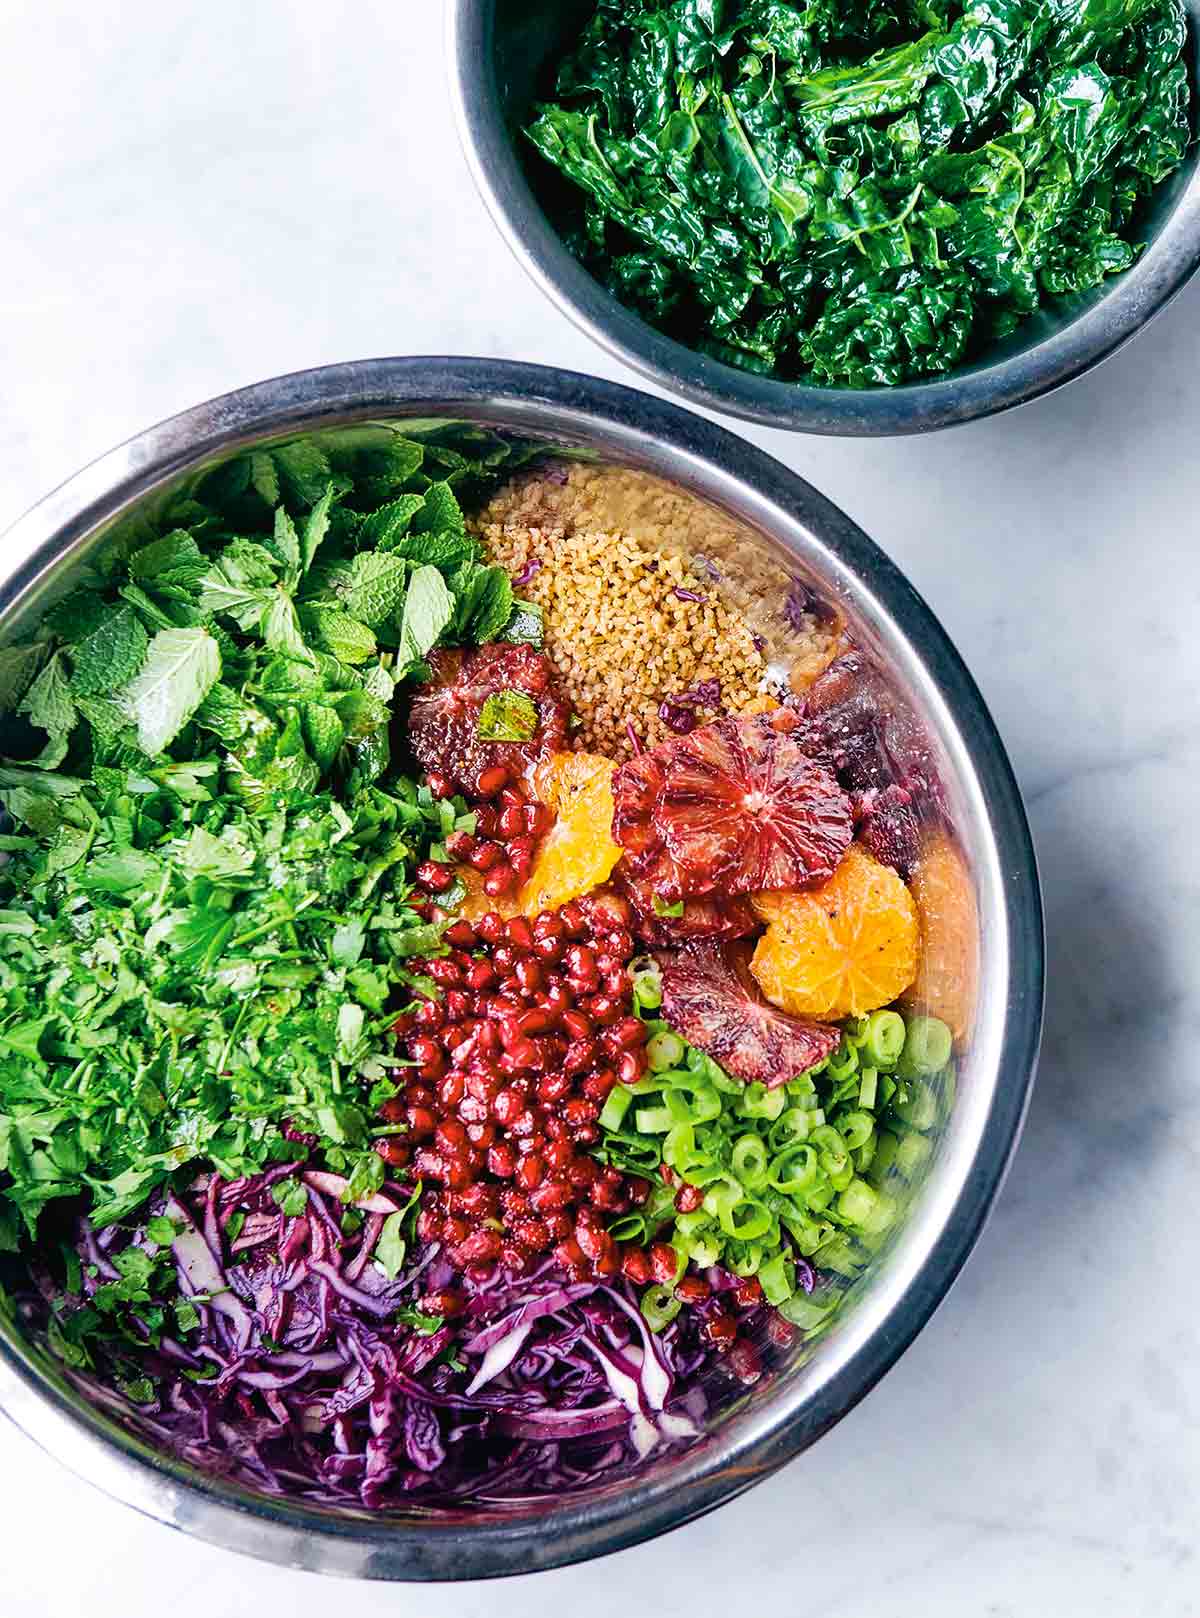 Two bowls filled with the components to make a grain bowl with kale and spiced orange dressing.